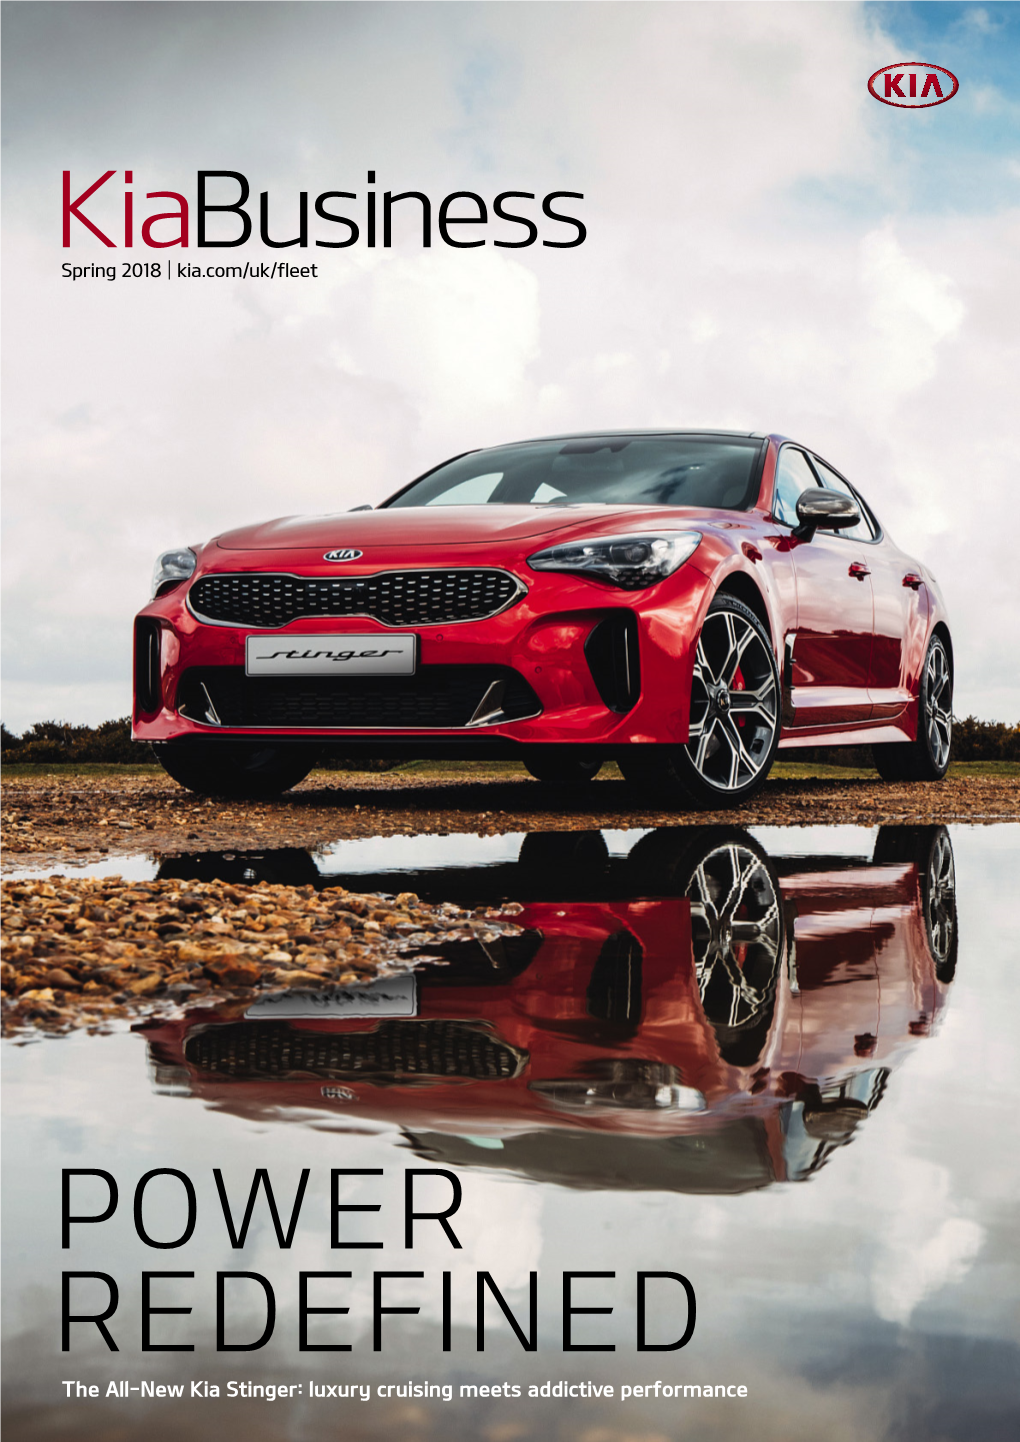 POWER REDEFINED the All-New Kia Stinger: Luxury Cruising Meets Addictiveperformance INTRODUCTION NEWSNEWS